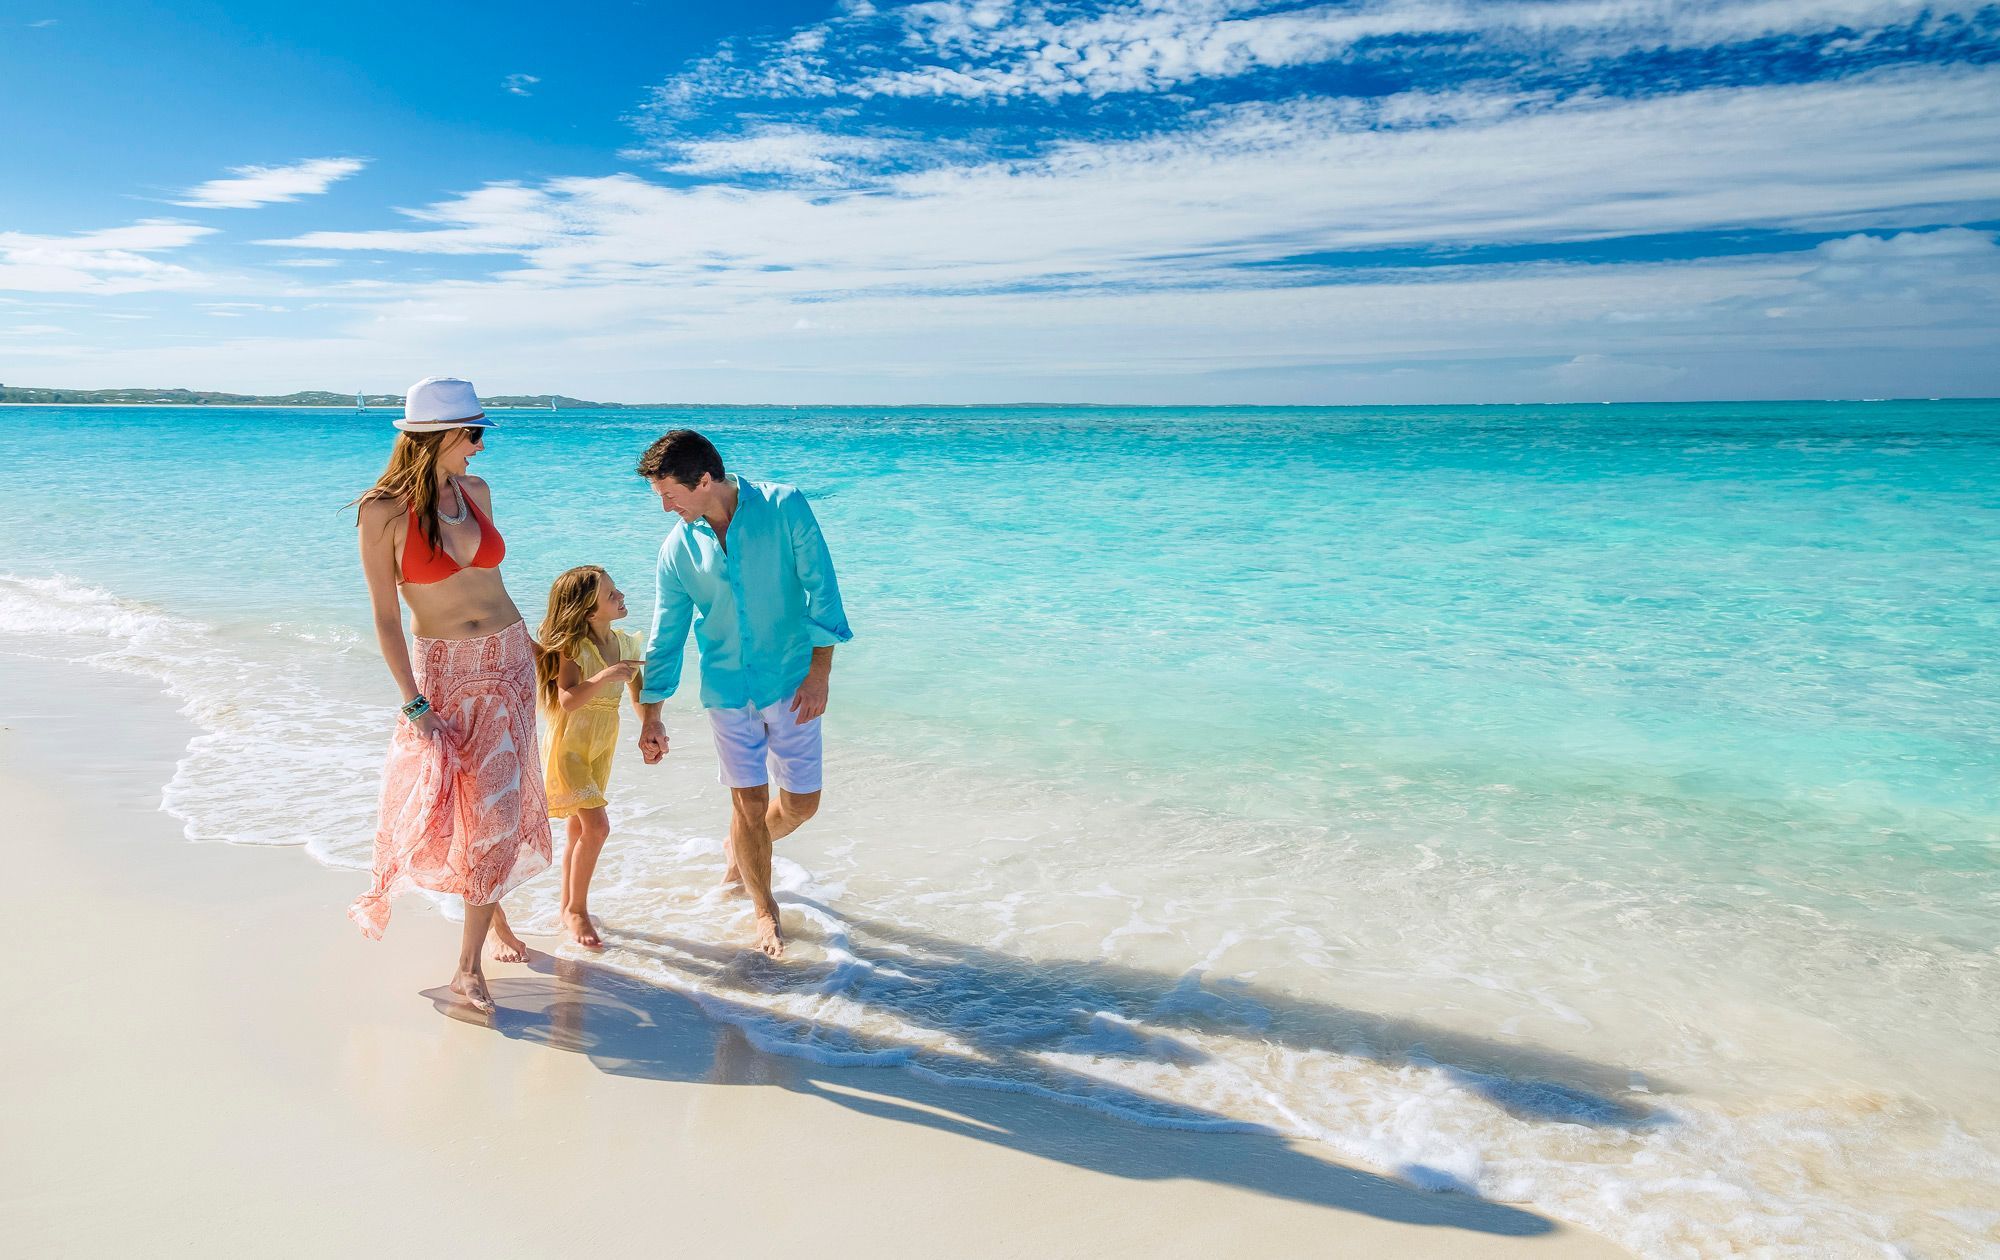 The Top 10 Reason to Stay at Sandals Caribbean Resorts